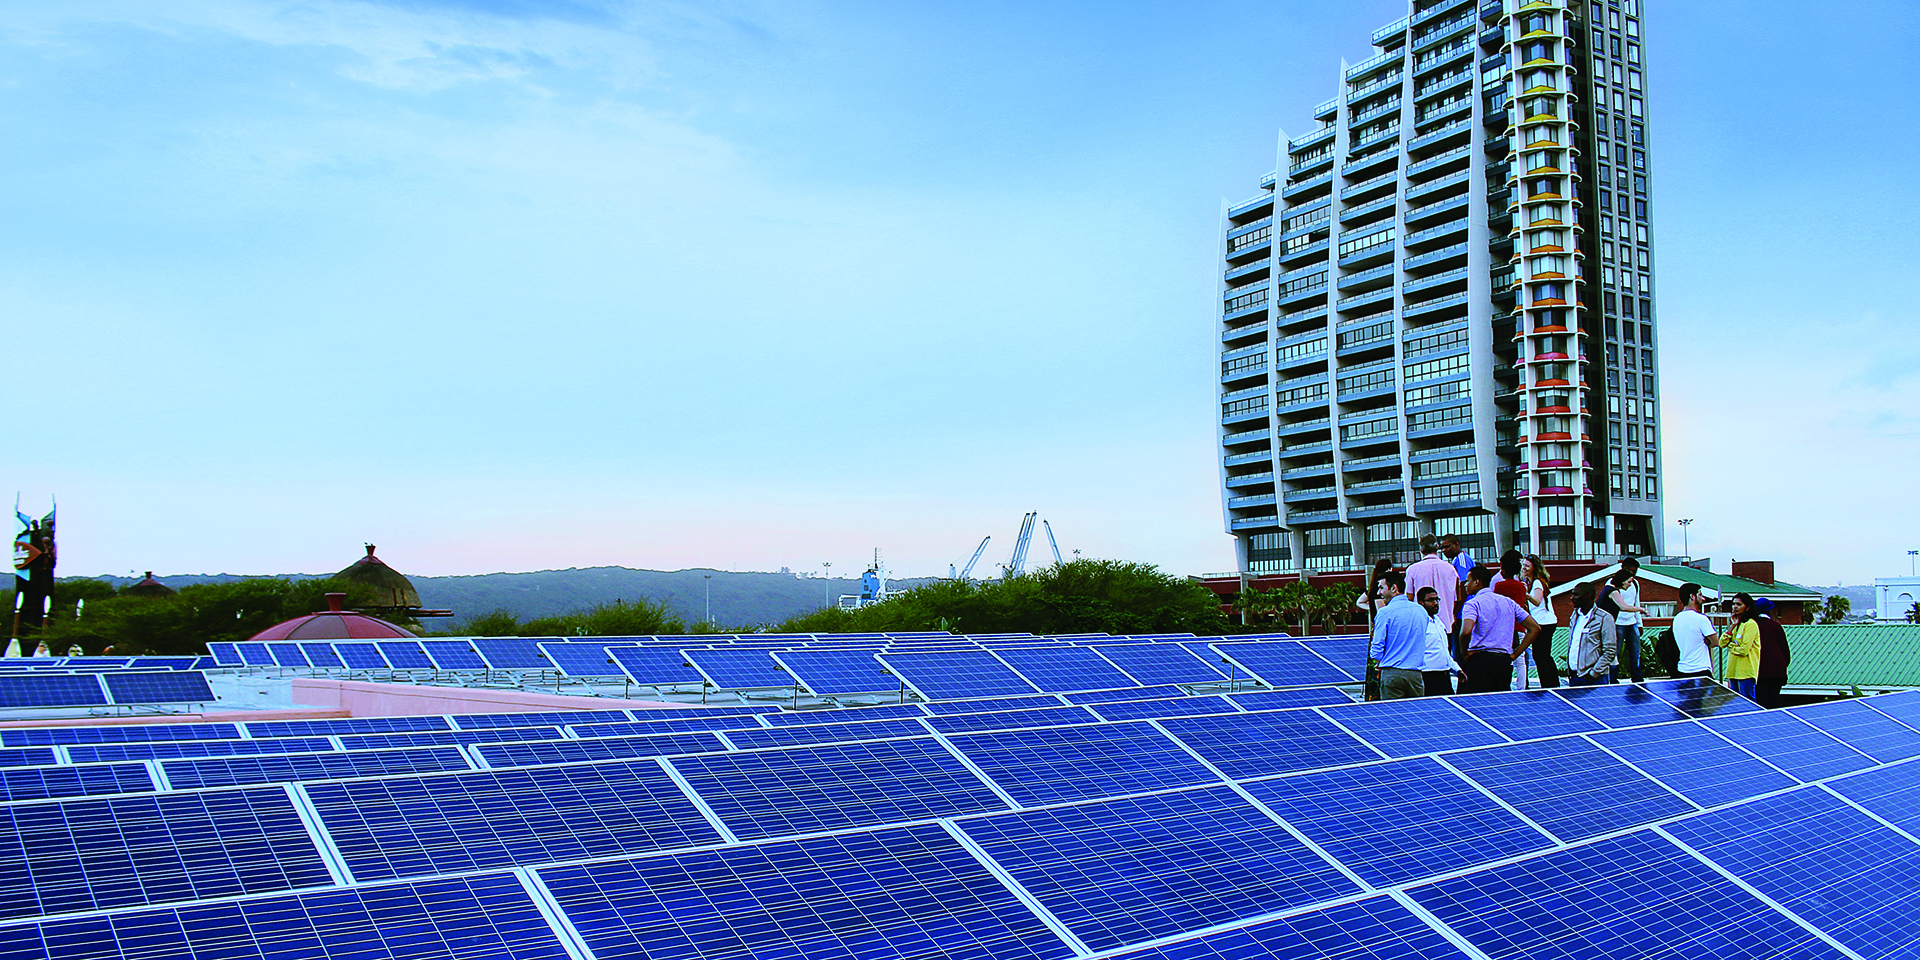 Image of a large group of people standing in the middle of a solar array. A large building and cranes can be seen in the distance.